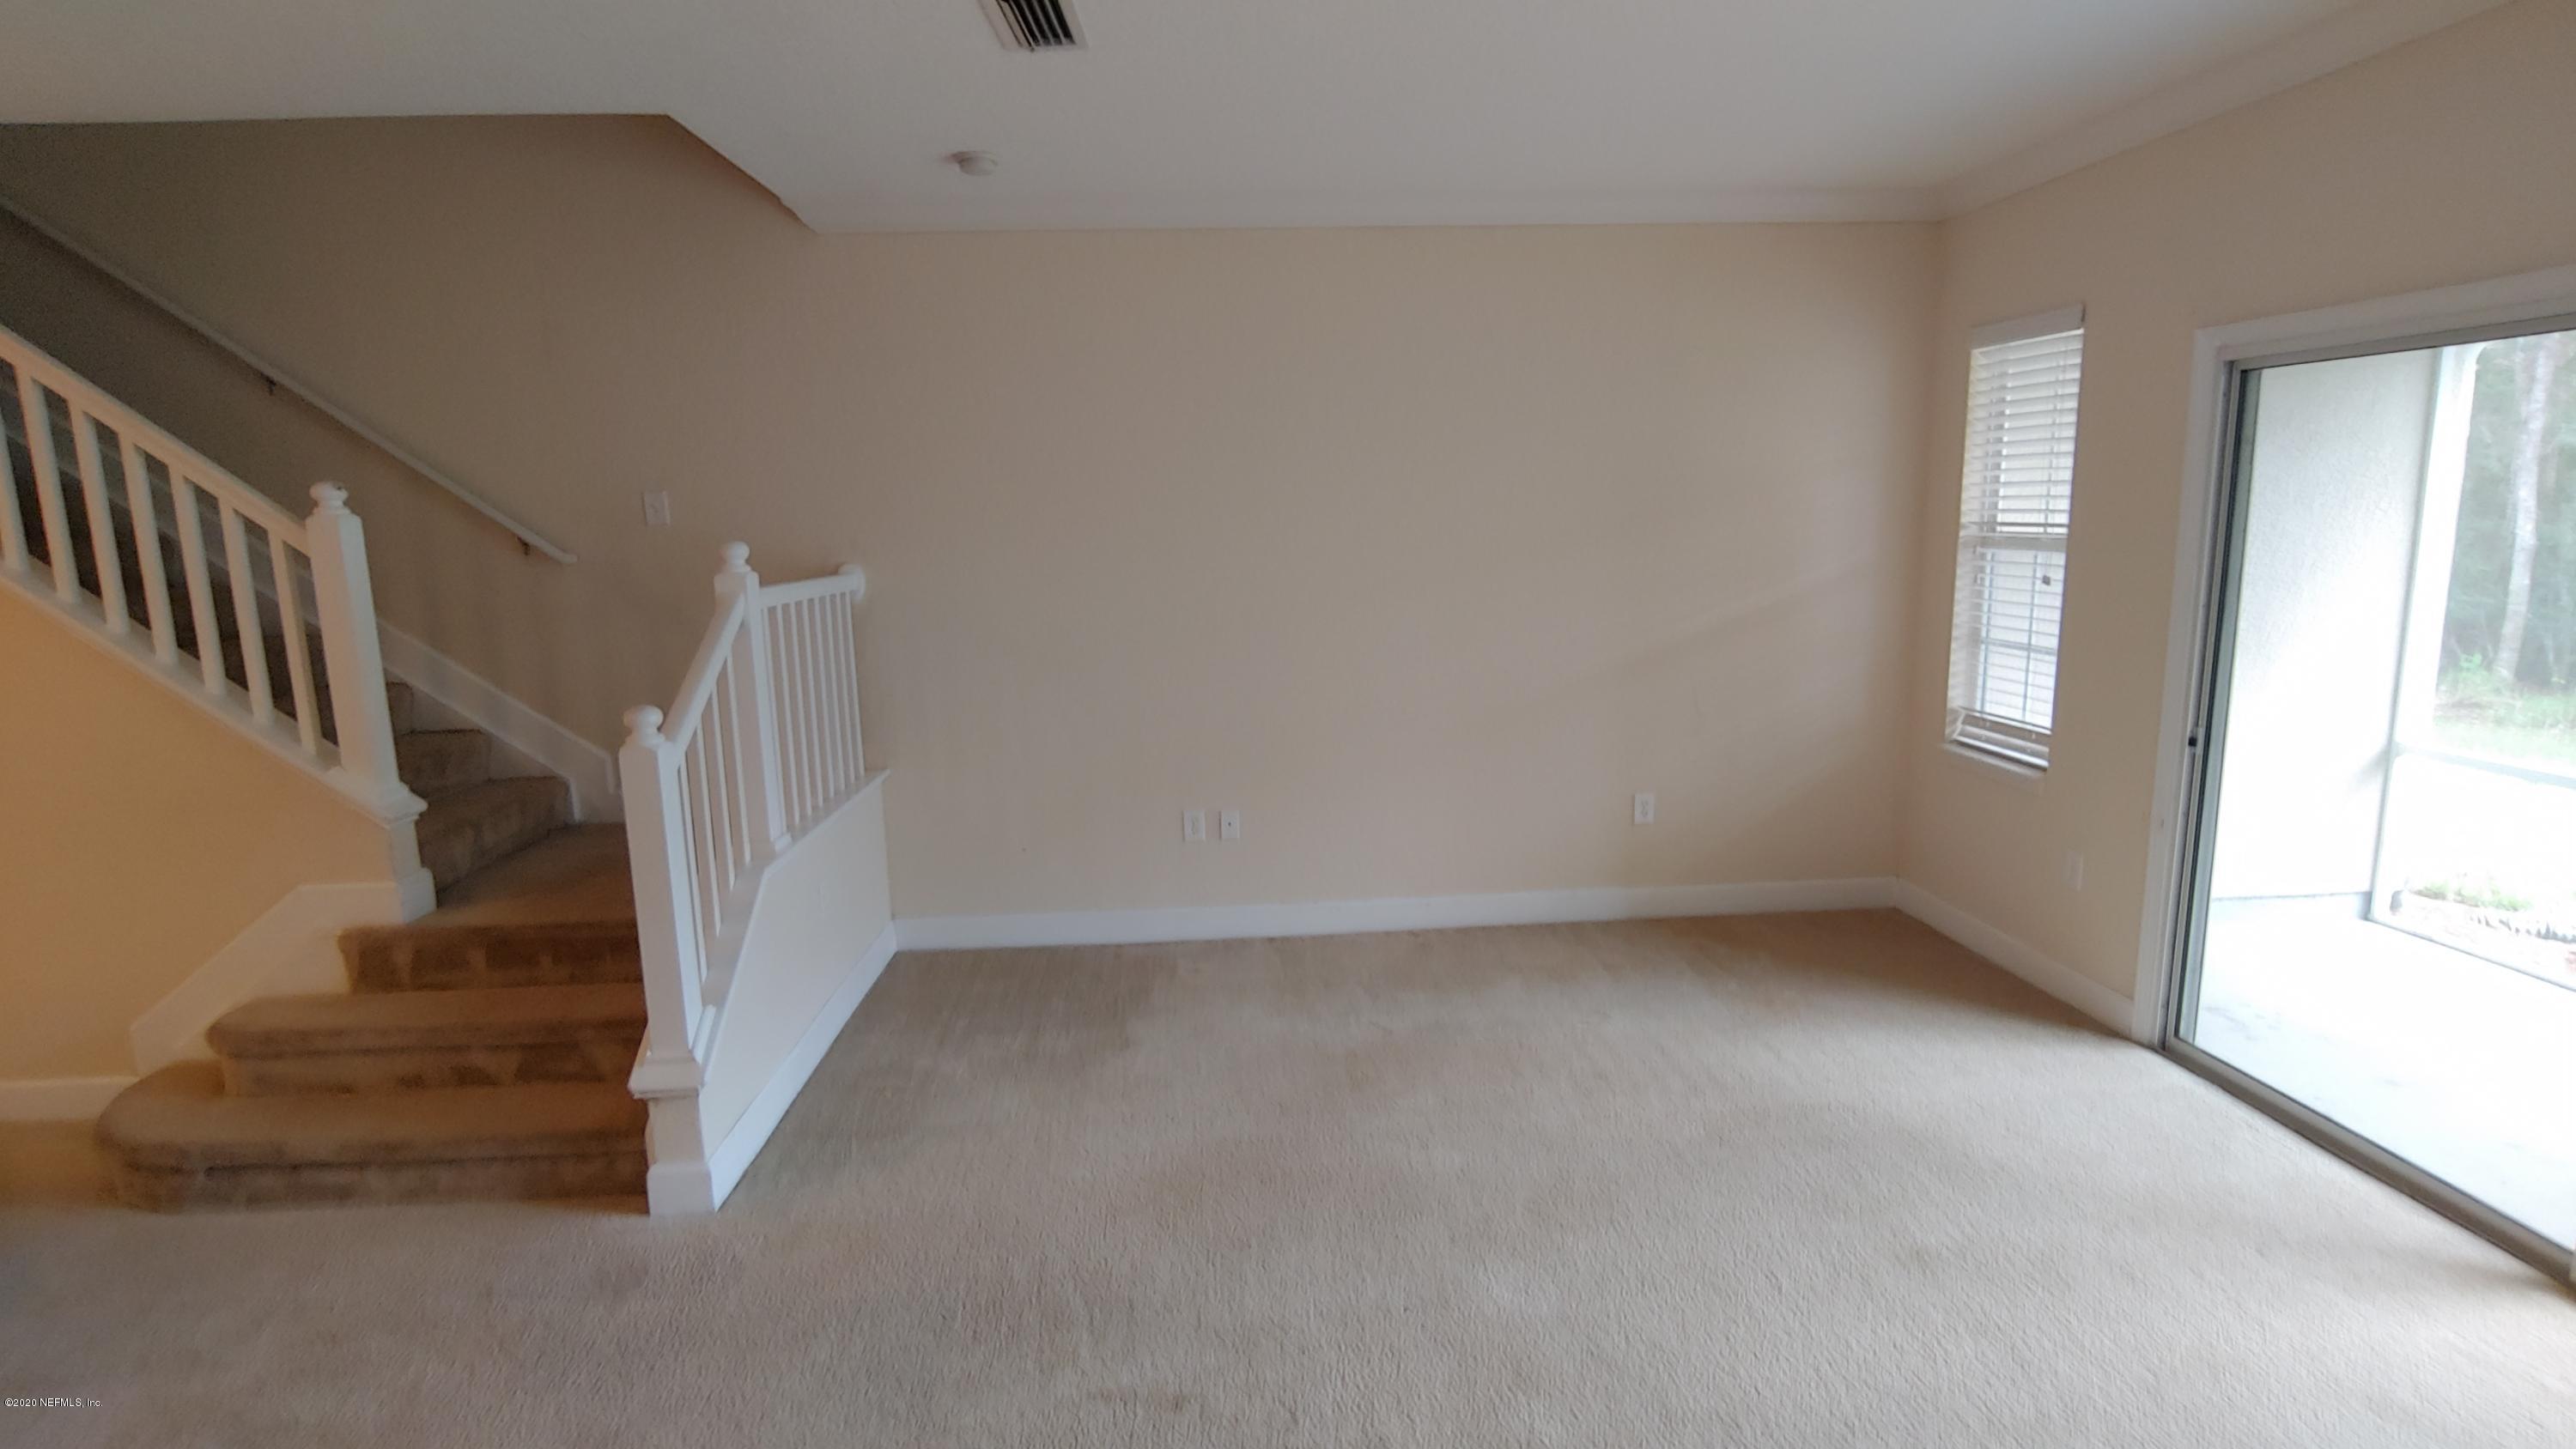 a view of an empty room with stairs